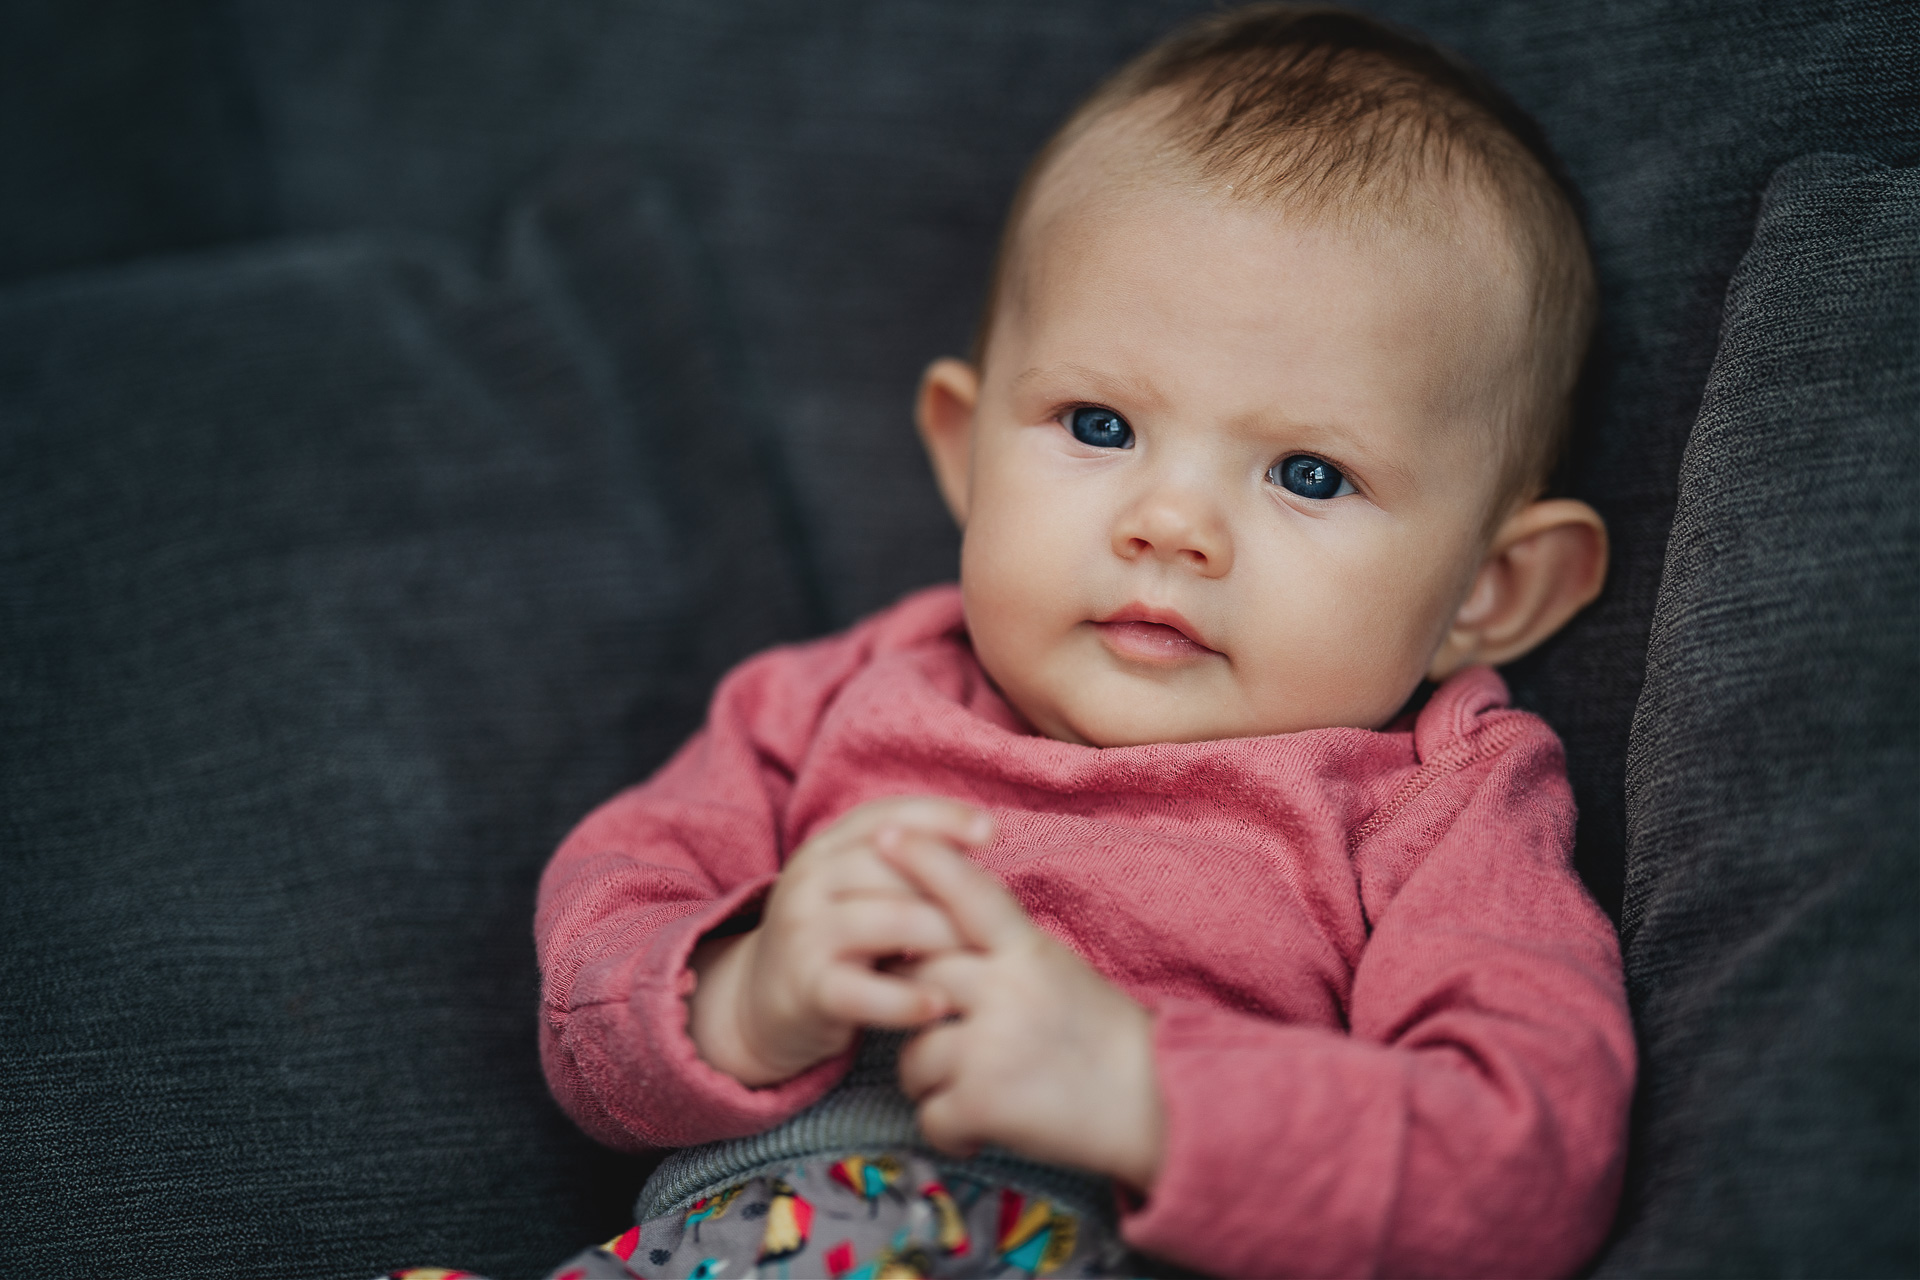 Family photography at home, a baby sitting on a sofa